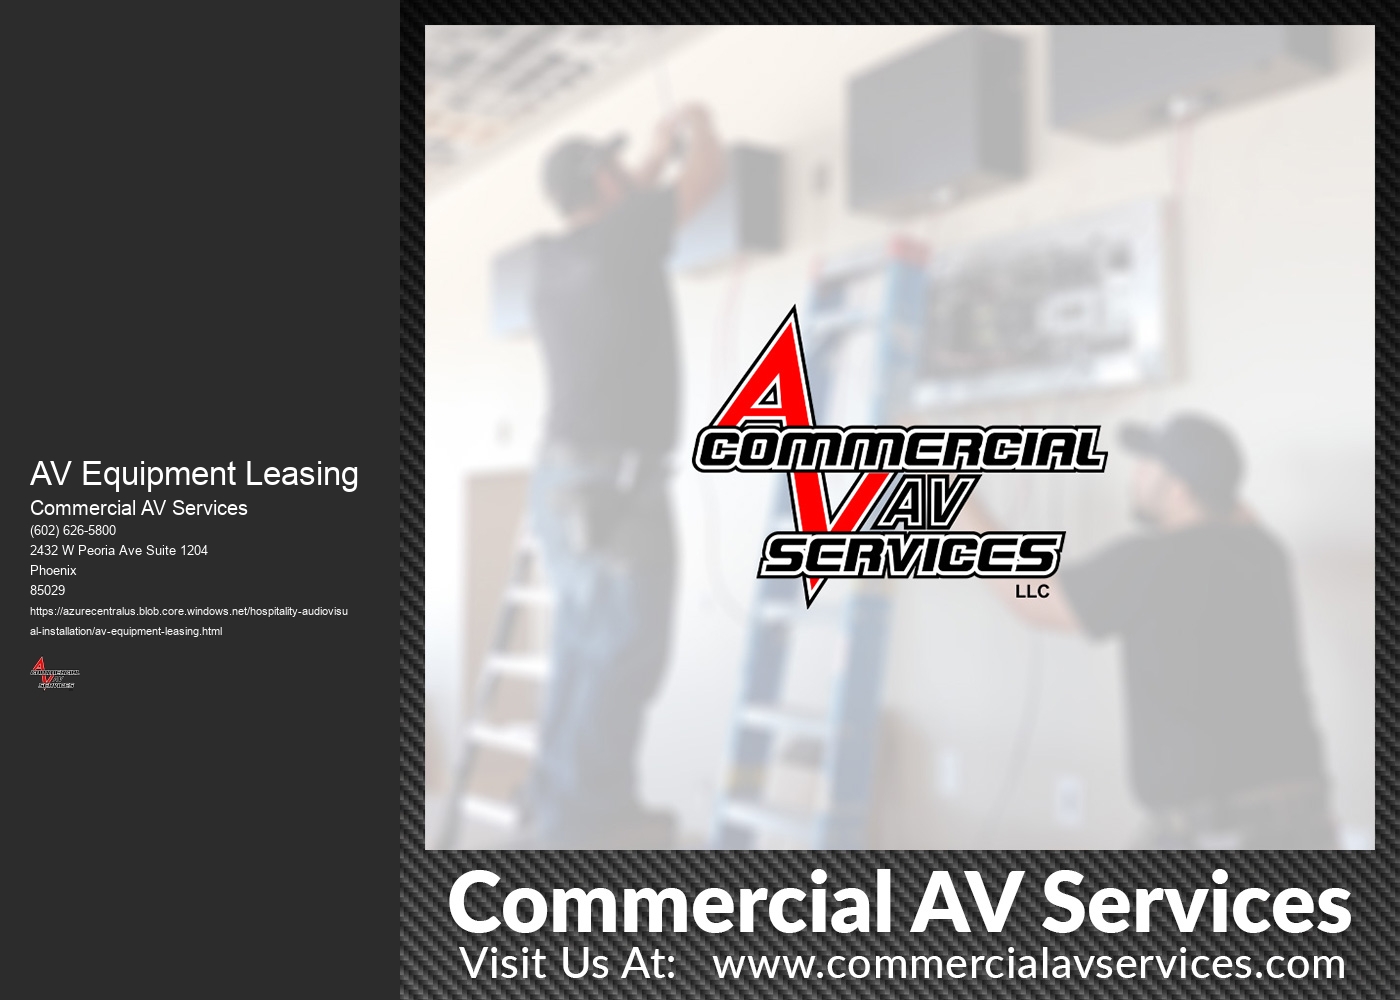 Are there any specific requirements or qualifications for leasing AV equipment?